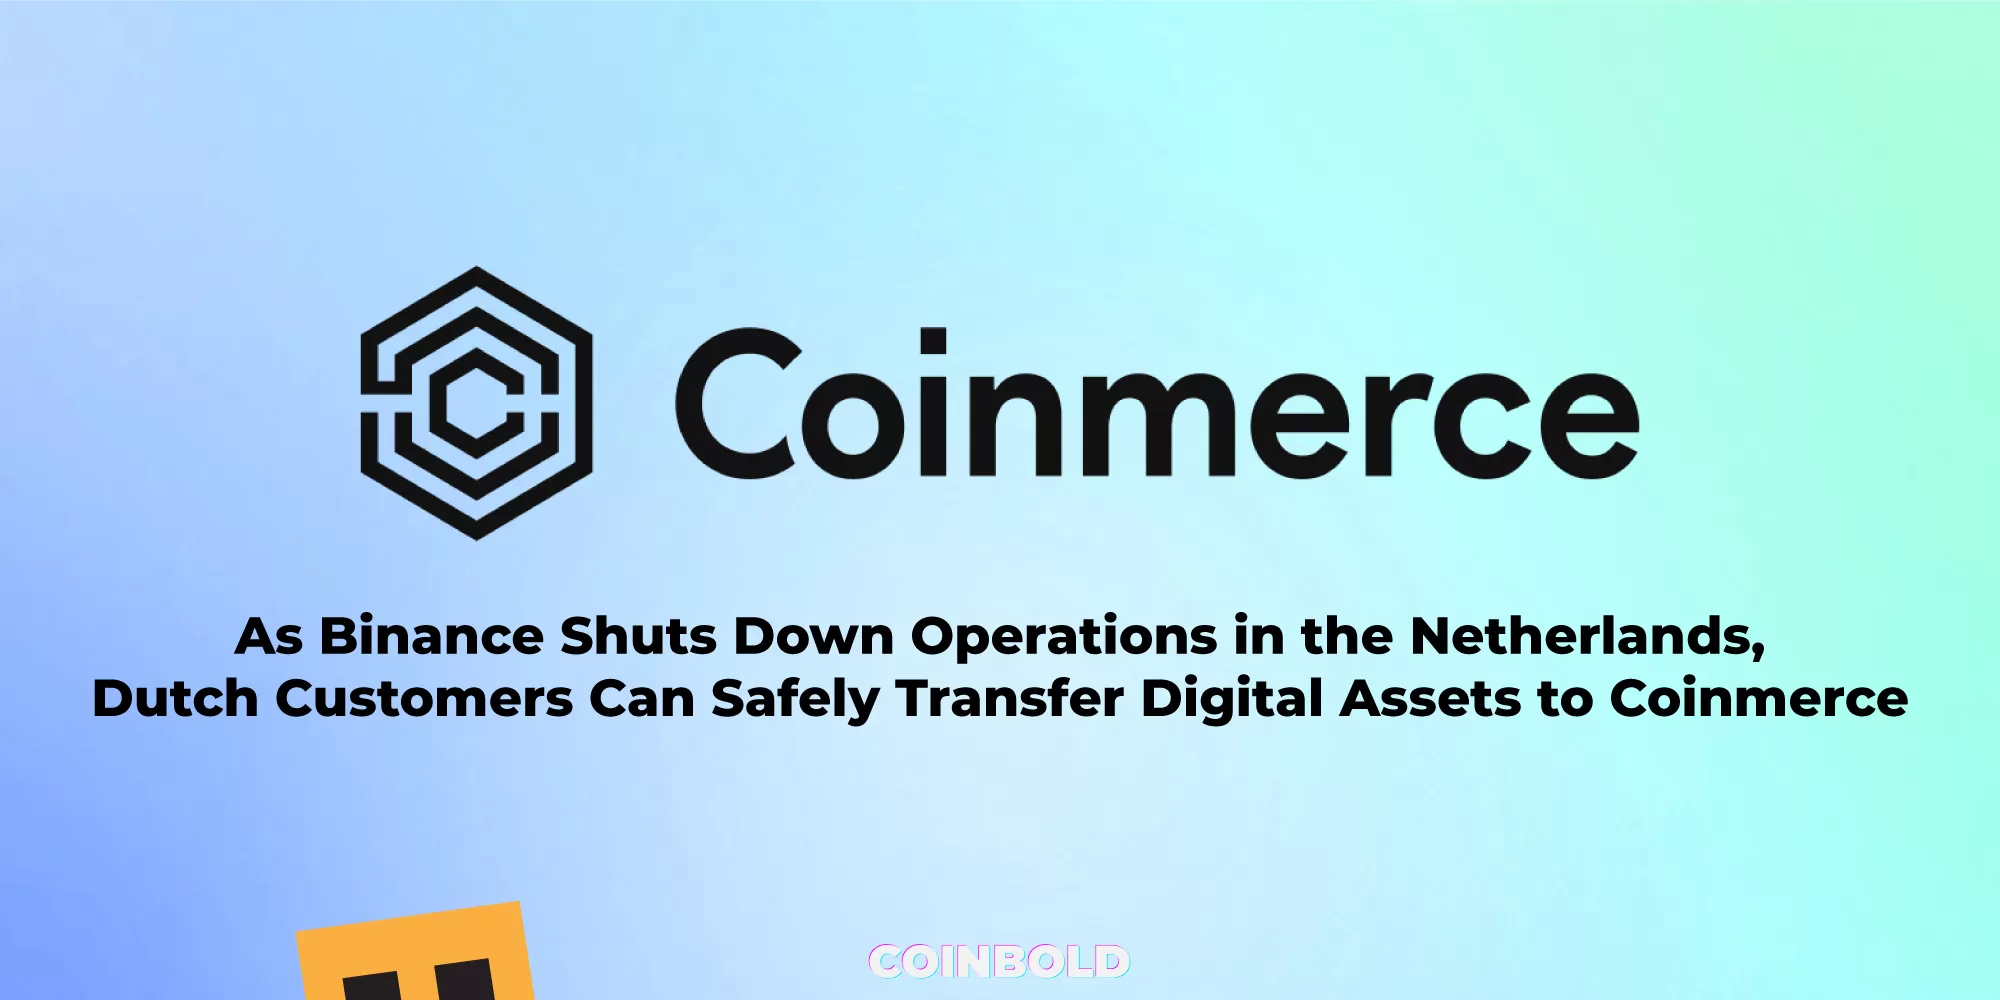 As Binance Shuts Down Operations in the Netherlands, Dutch Customers Can Safely Transfer Digital Assets to Coinmerce